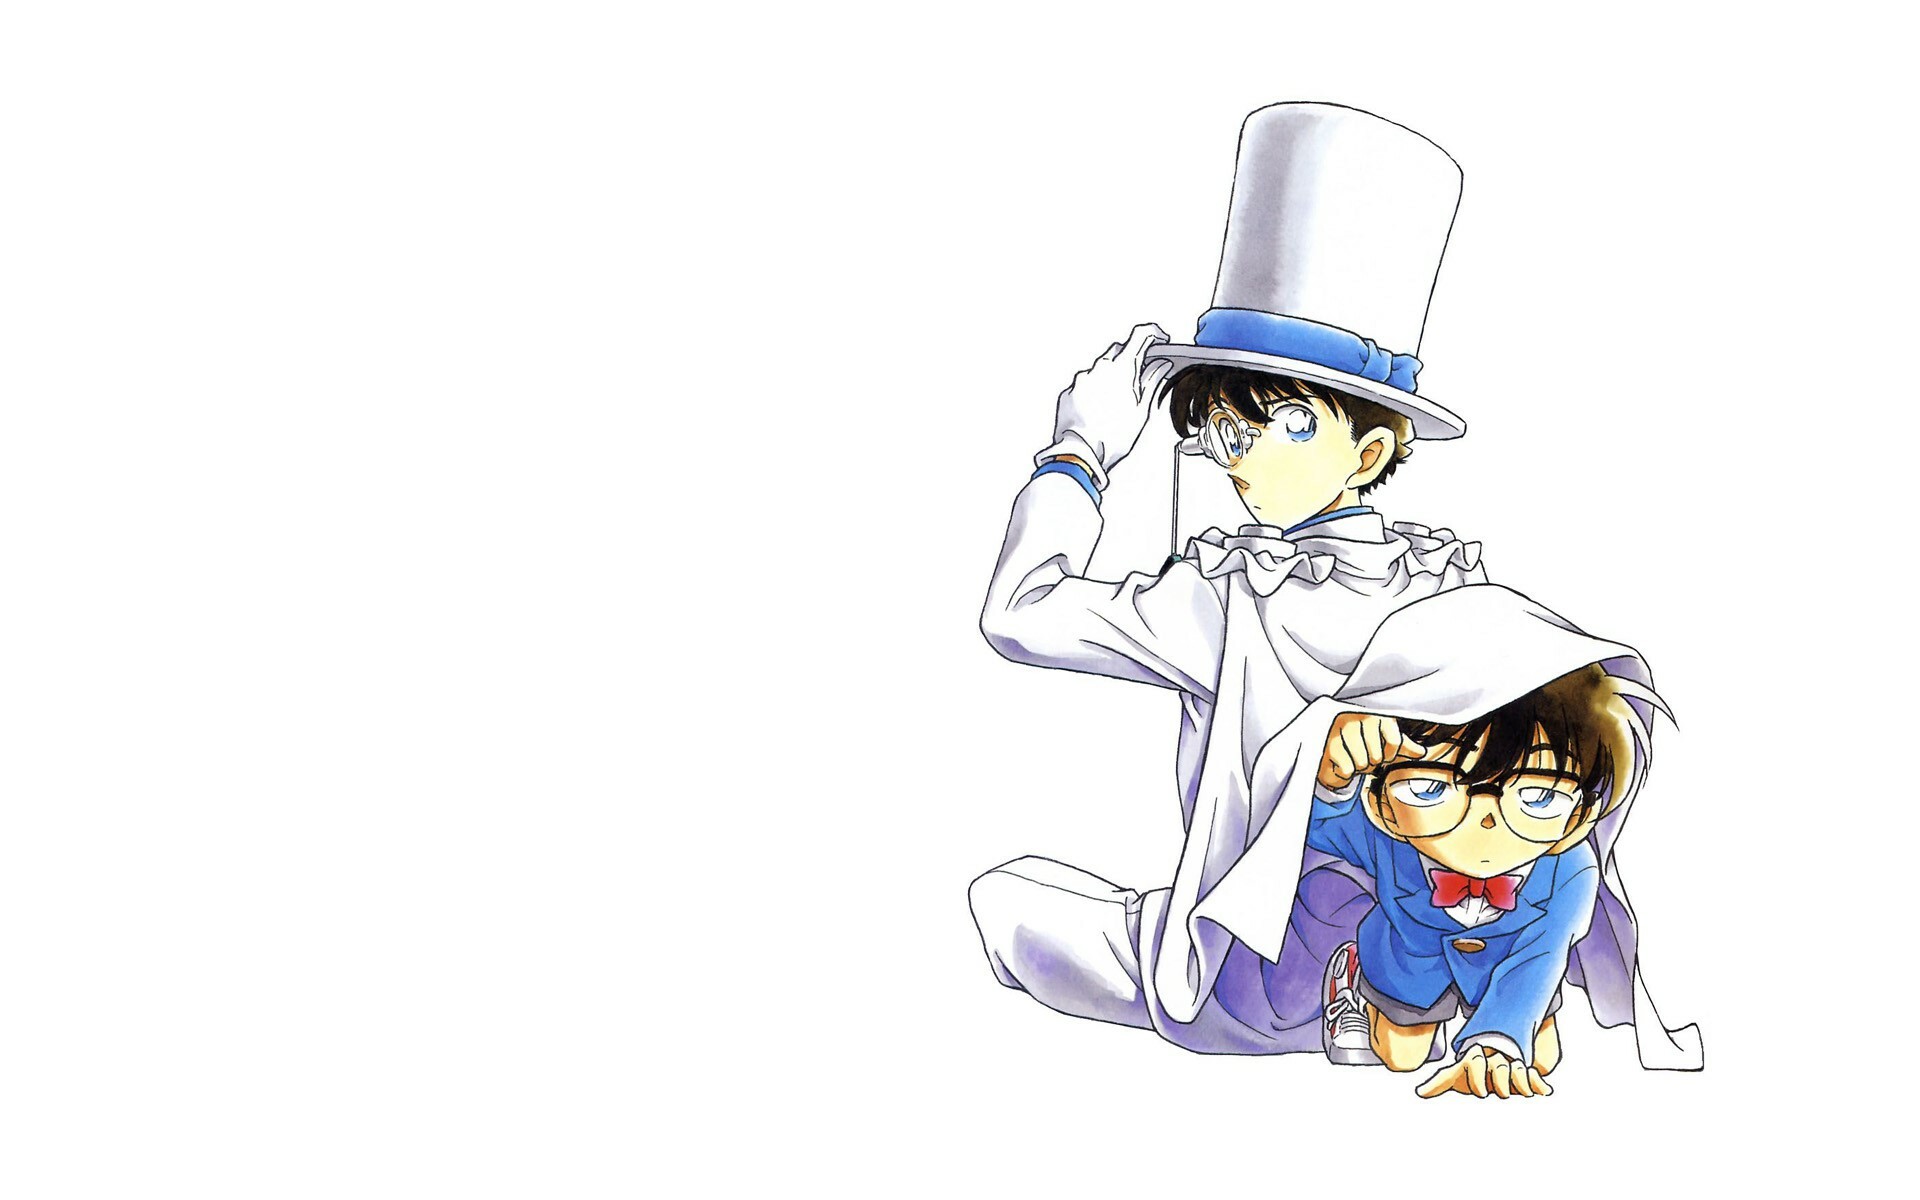 Detective Conan: The series follows Shinichi Kudo, who was inadvertently transformed into a child. 1920x1200 HD Wallpaper.